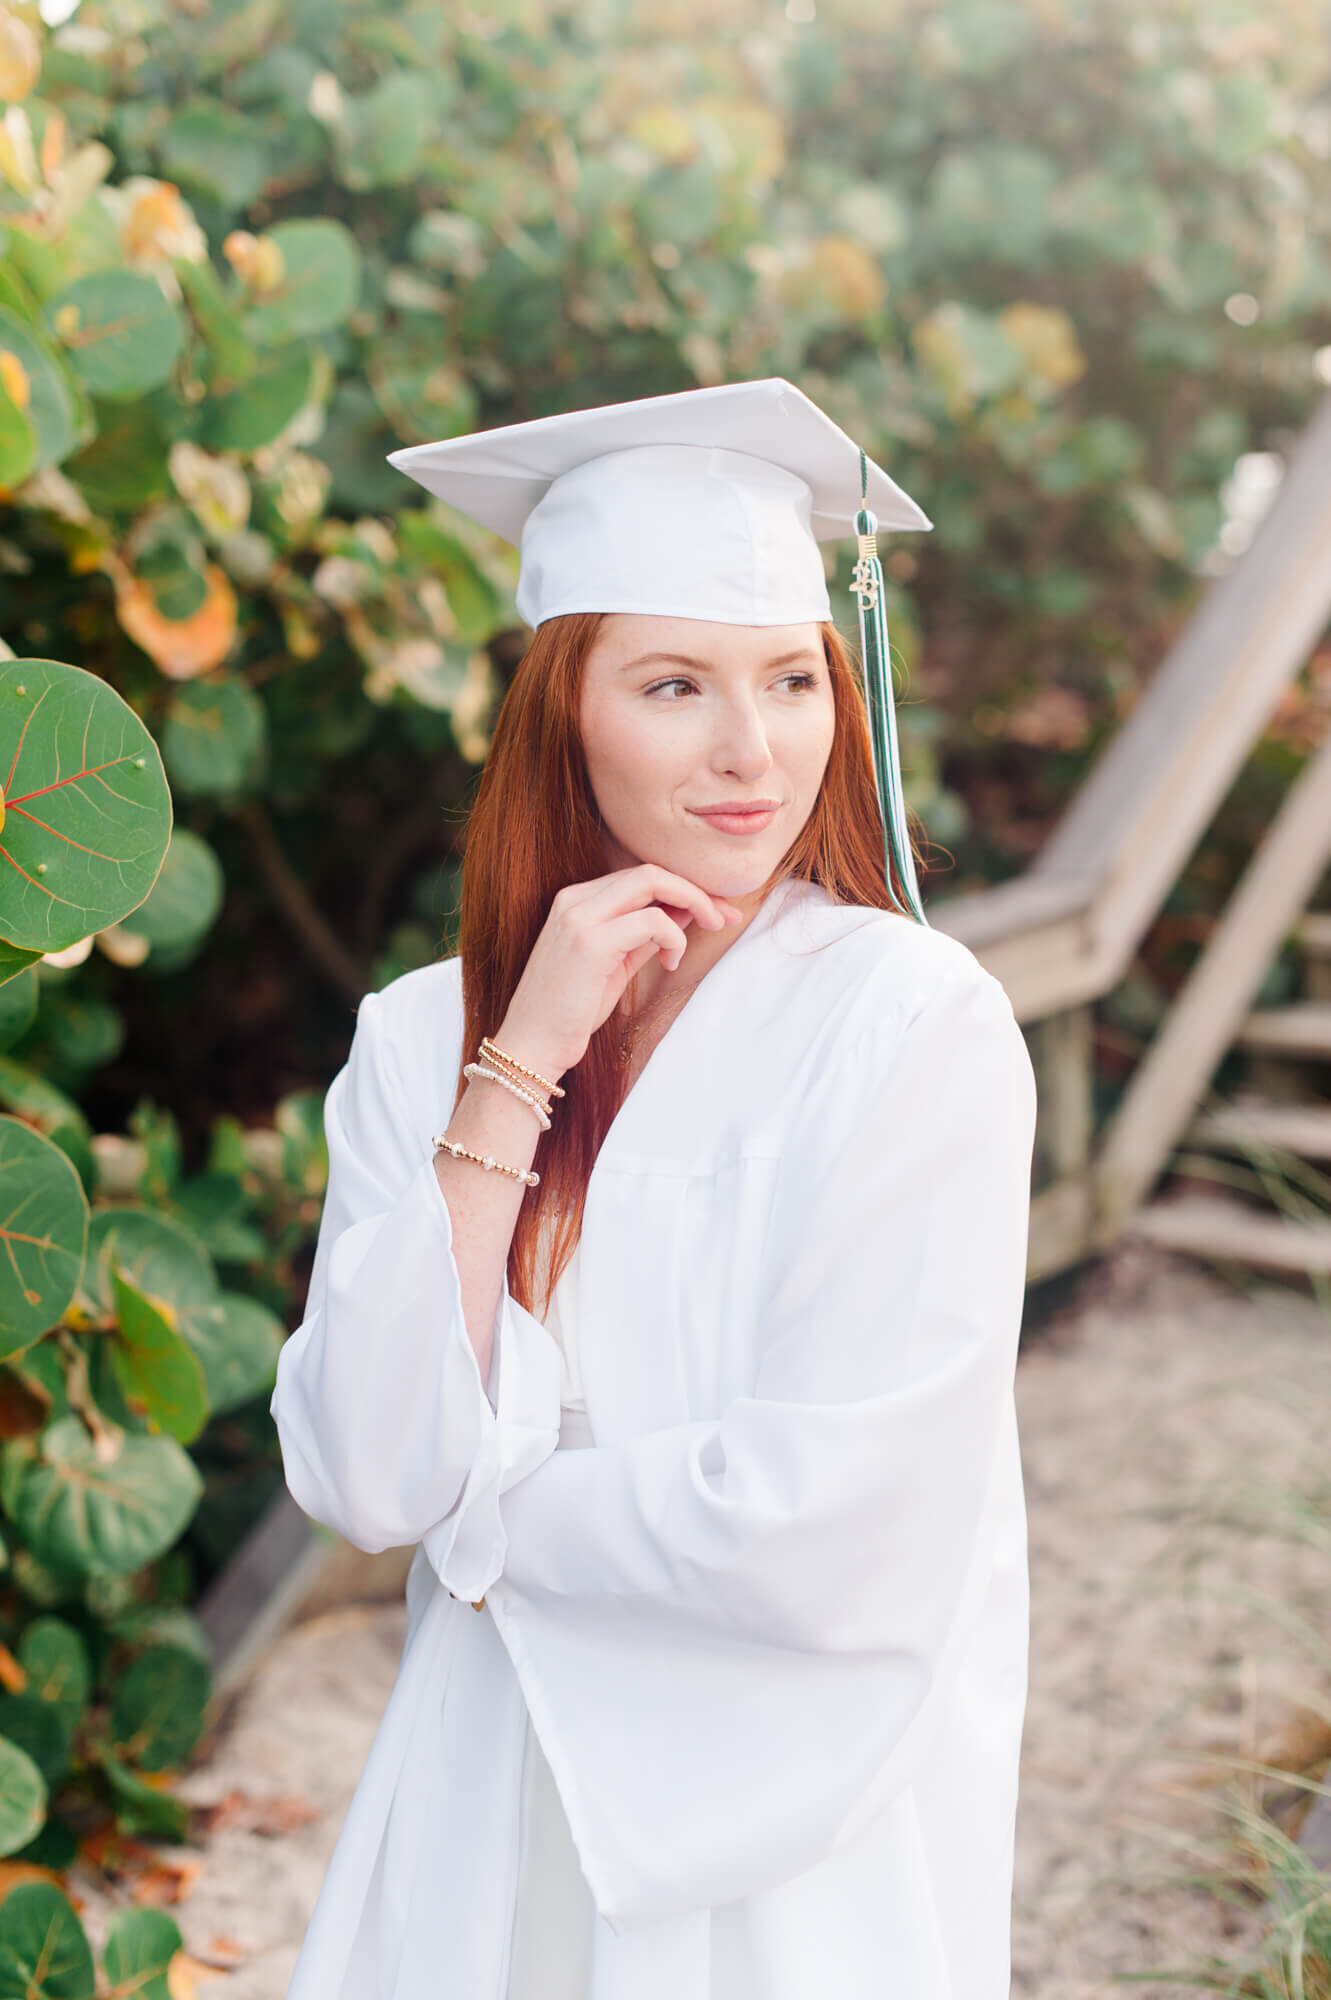 Senior stands near boardwalk during her senior session wearing aa white cap and gown